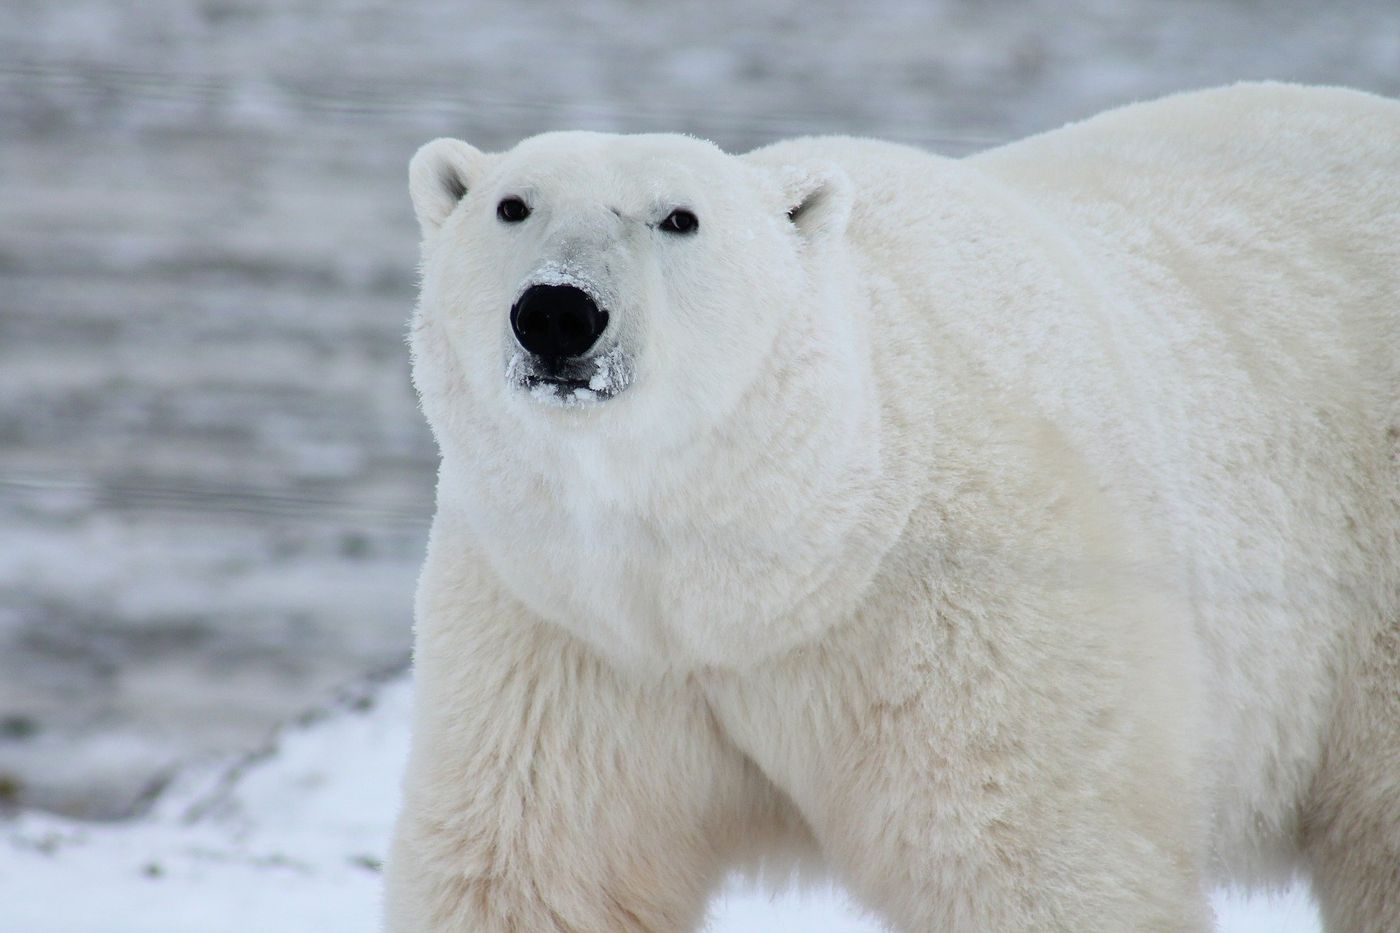 The Arctic's iconic polar bear may be a carnivore, but its prey depend on the nutrients delivered by net primary production.